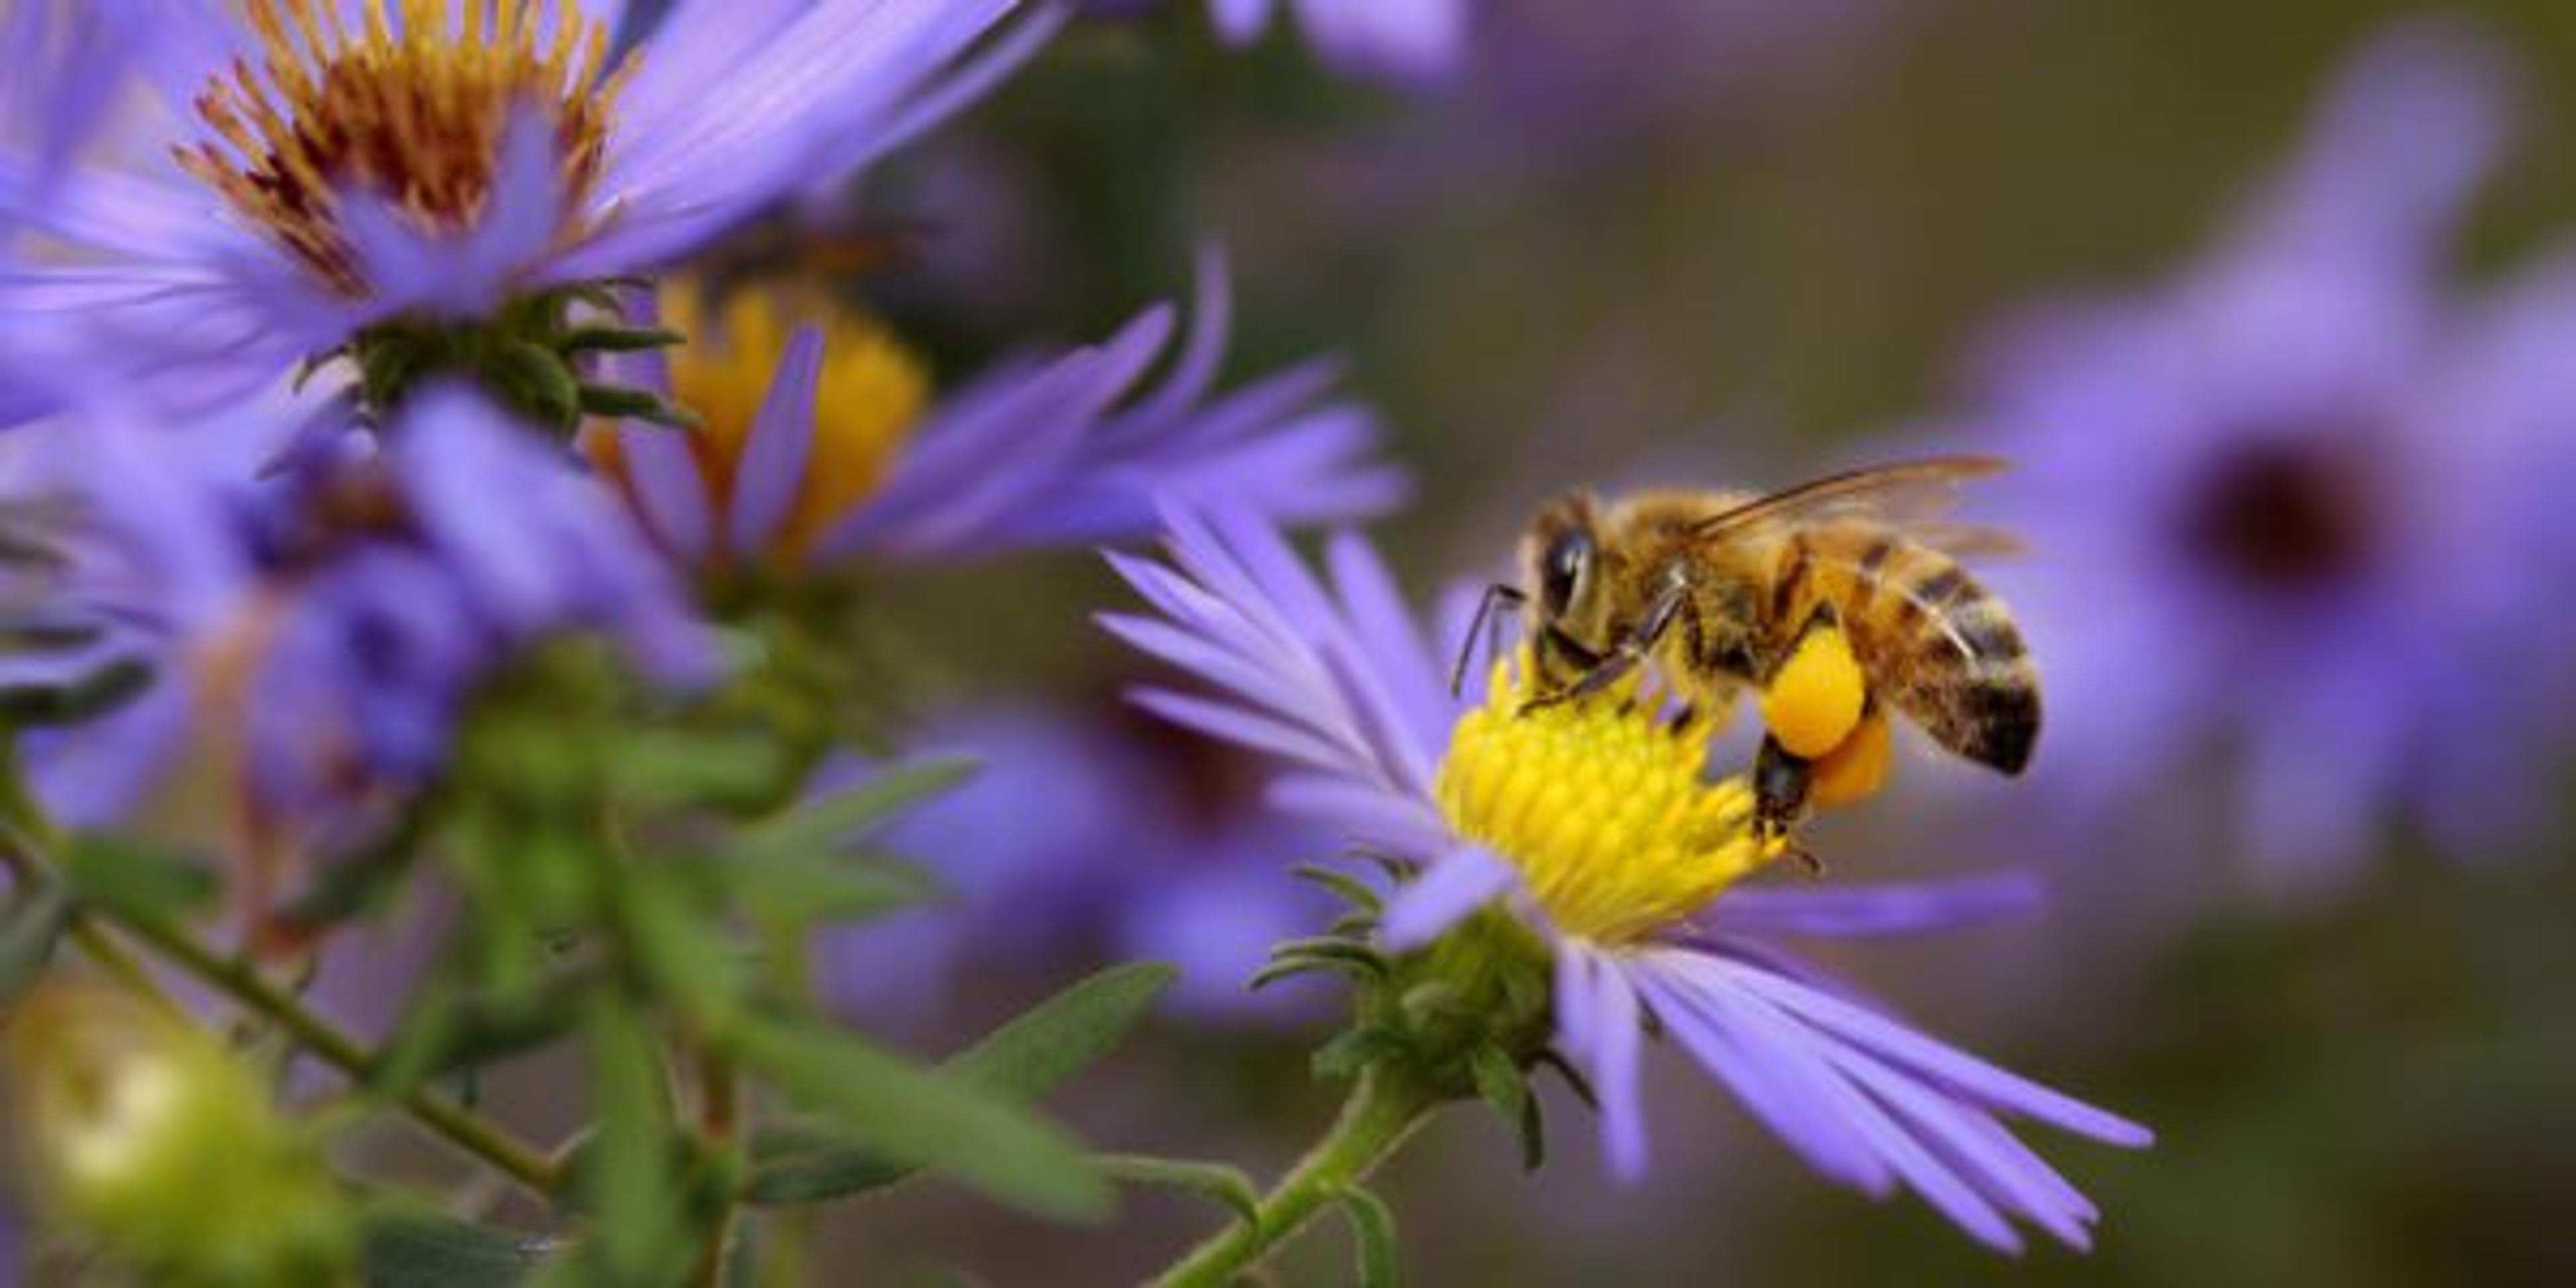 Do you know about Michigan's four species of bees, and the work they do to pollinate our flowers, fruits, and vegetables?